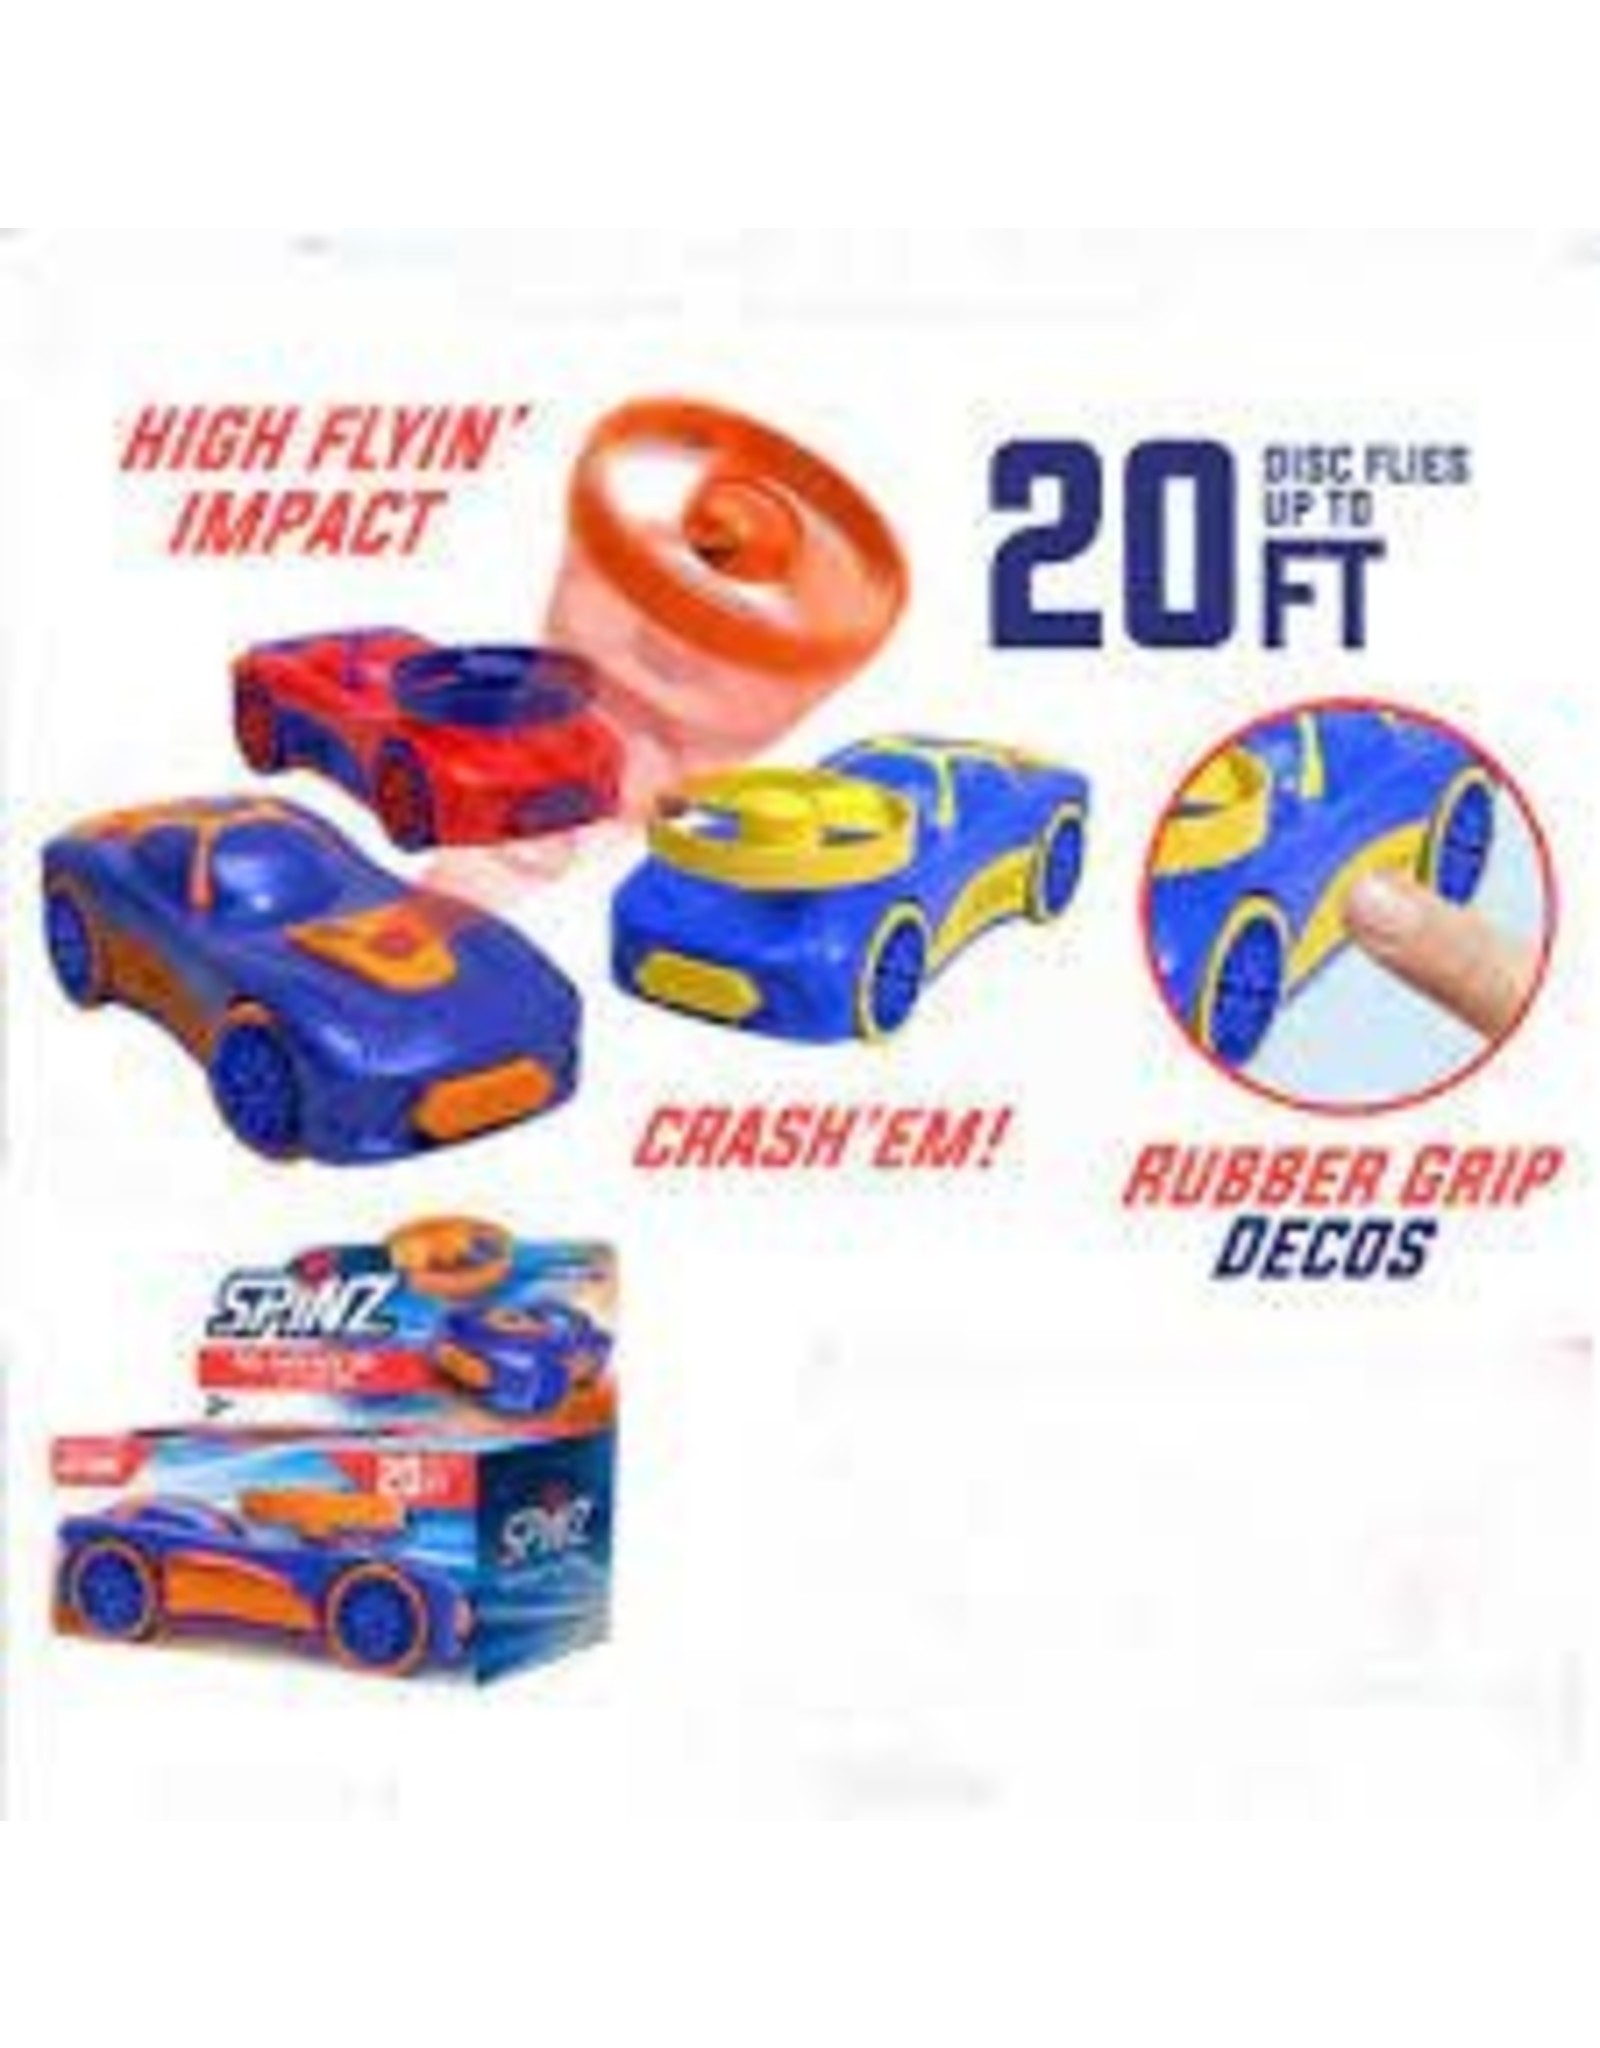 Spinz Pull Back Race Car Red with Blue